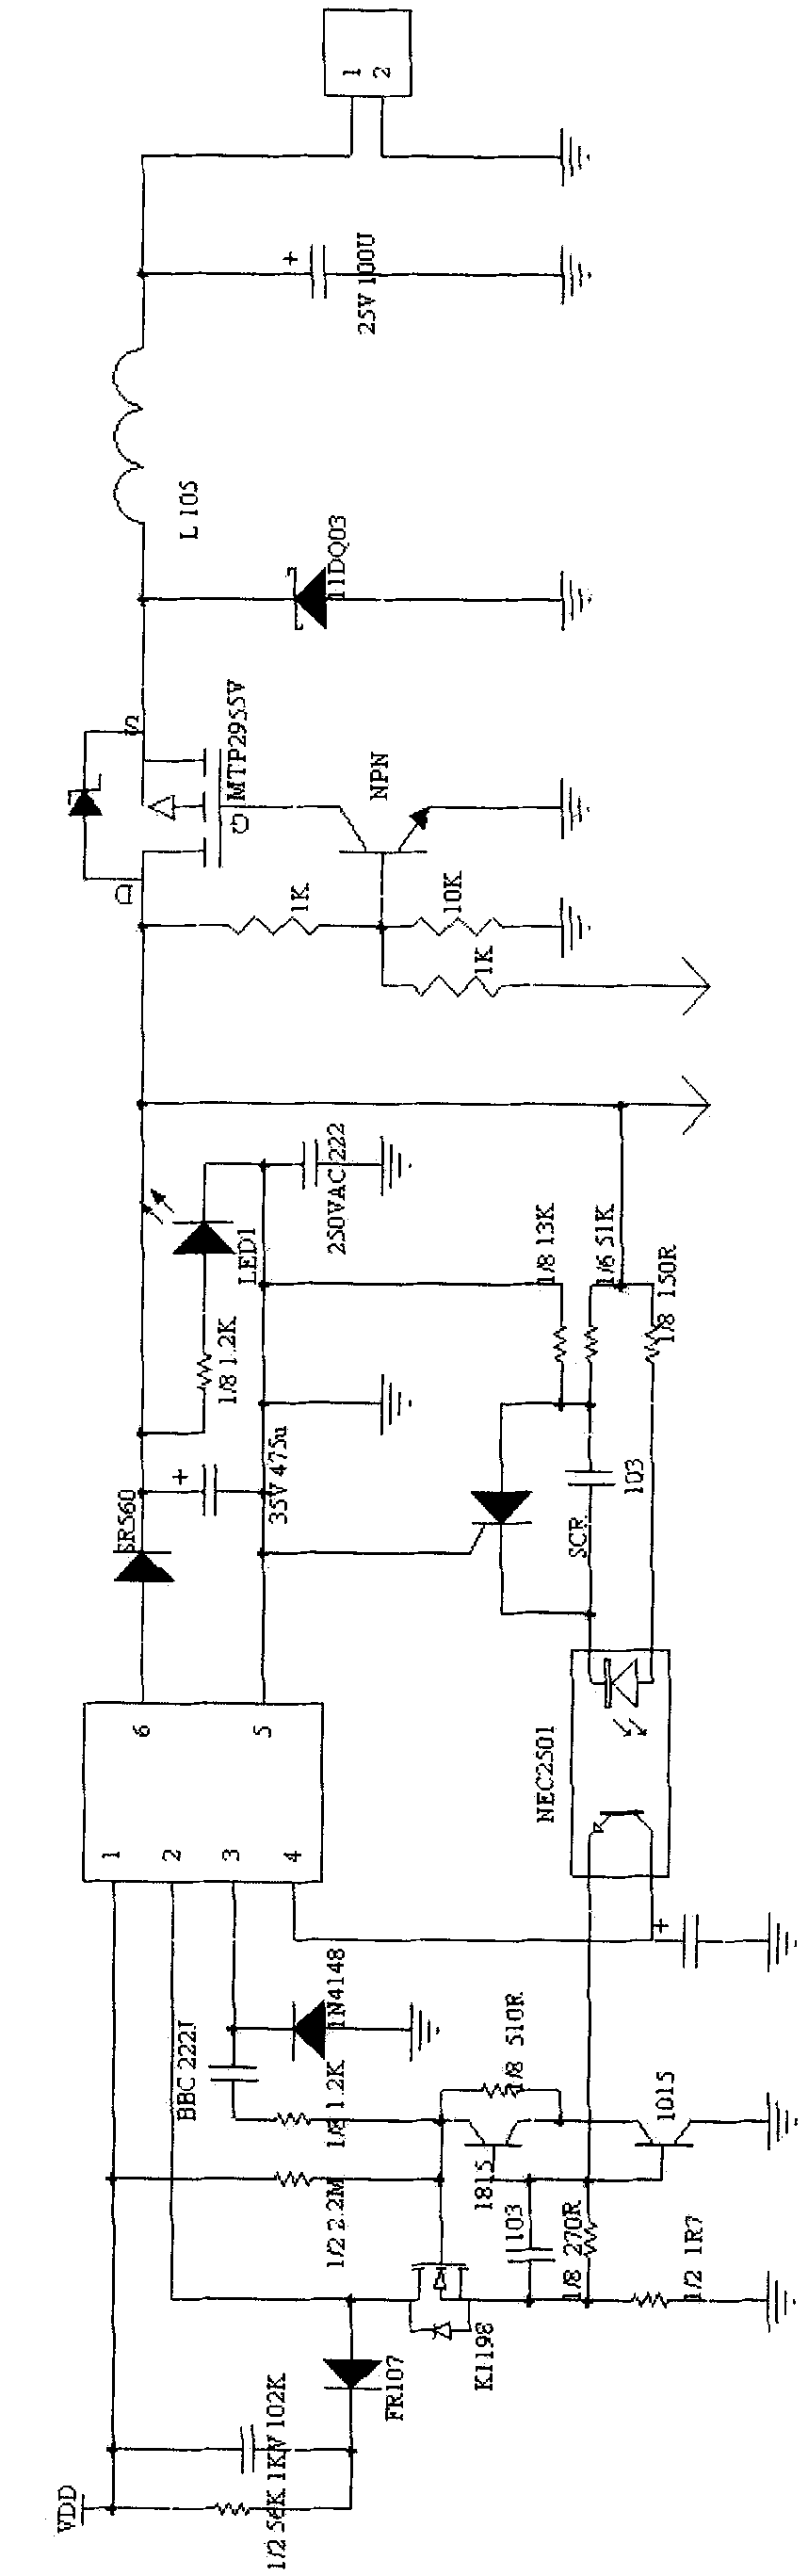 LED light source control system for growth of configuration plants